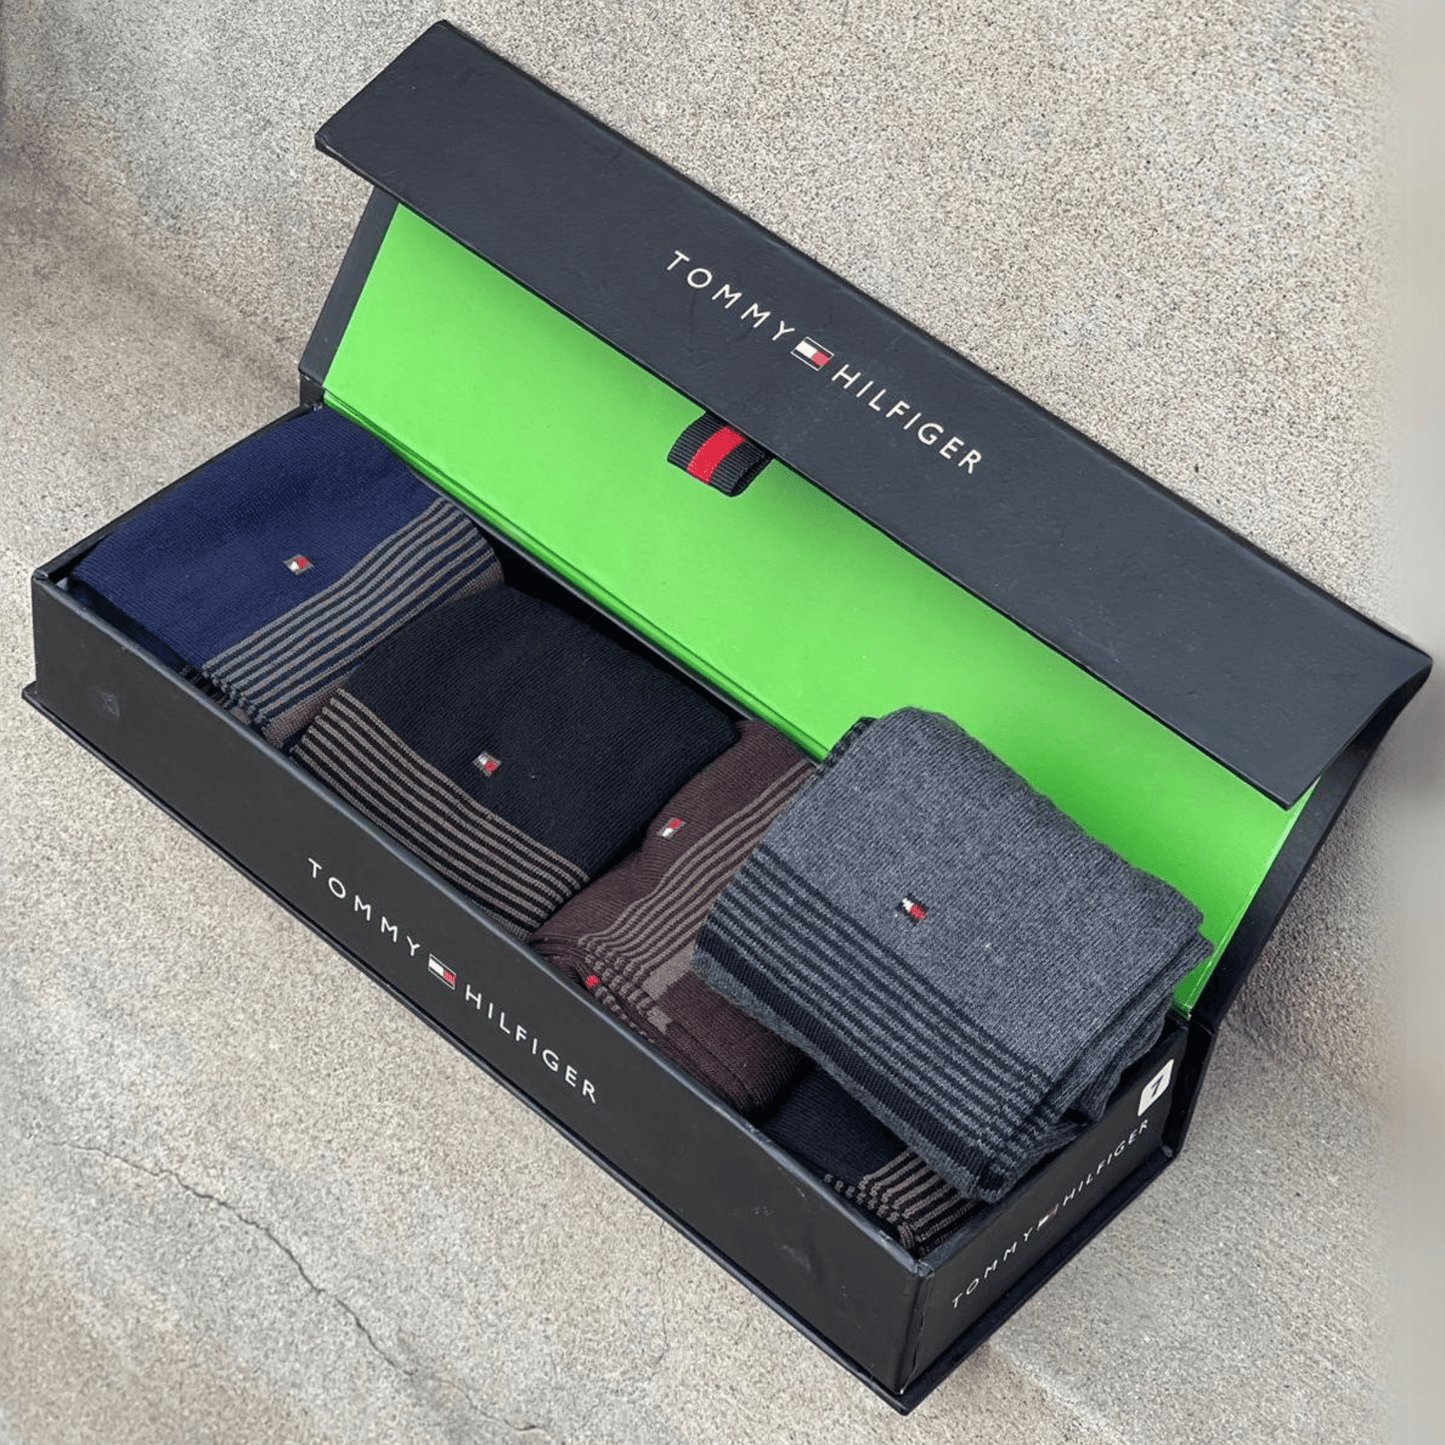 TM(Tommy Hilfiger) Brand 5 Colors Socks for Men with Premium Gift Packing Export Quality